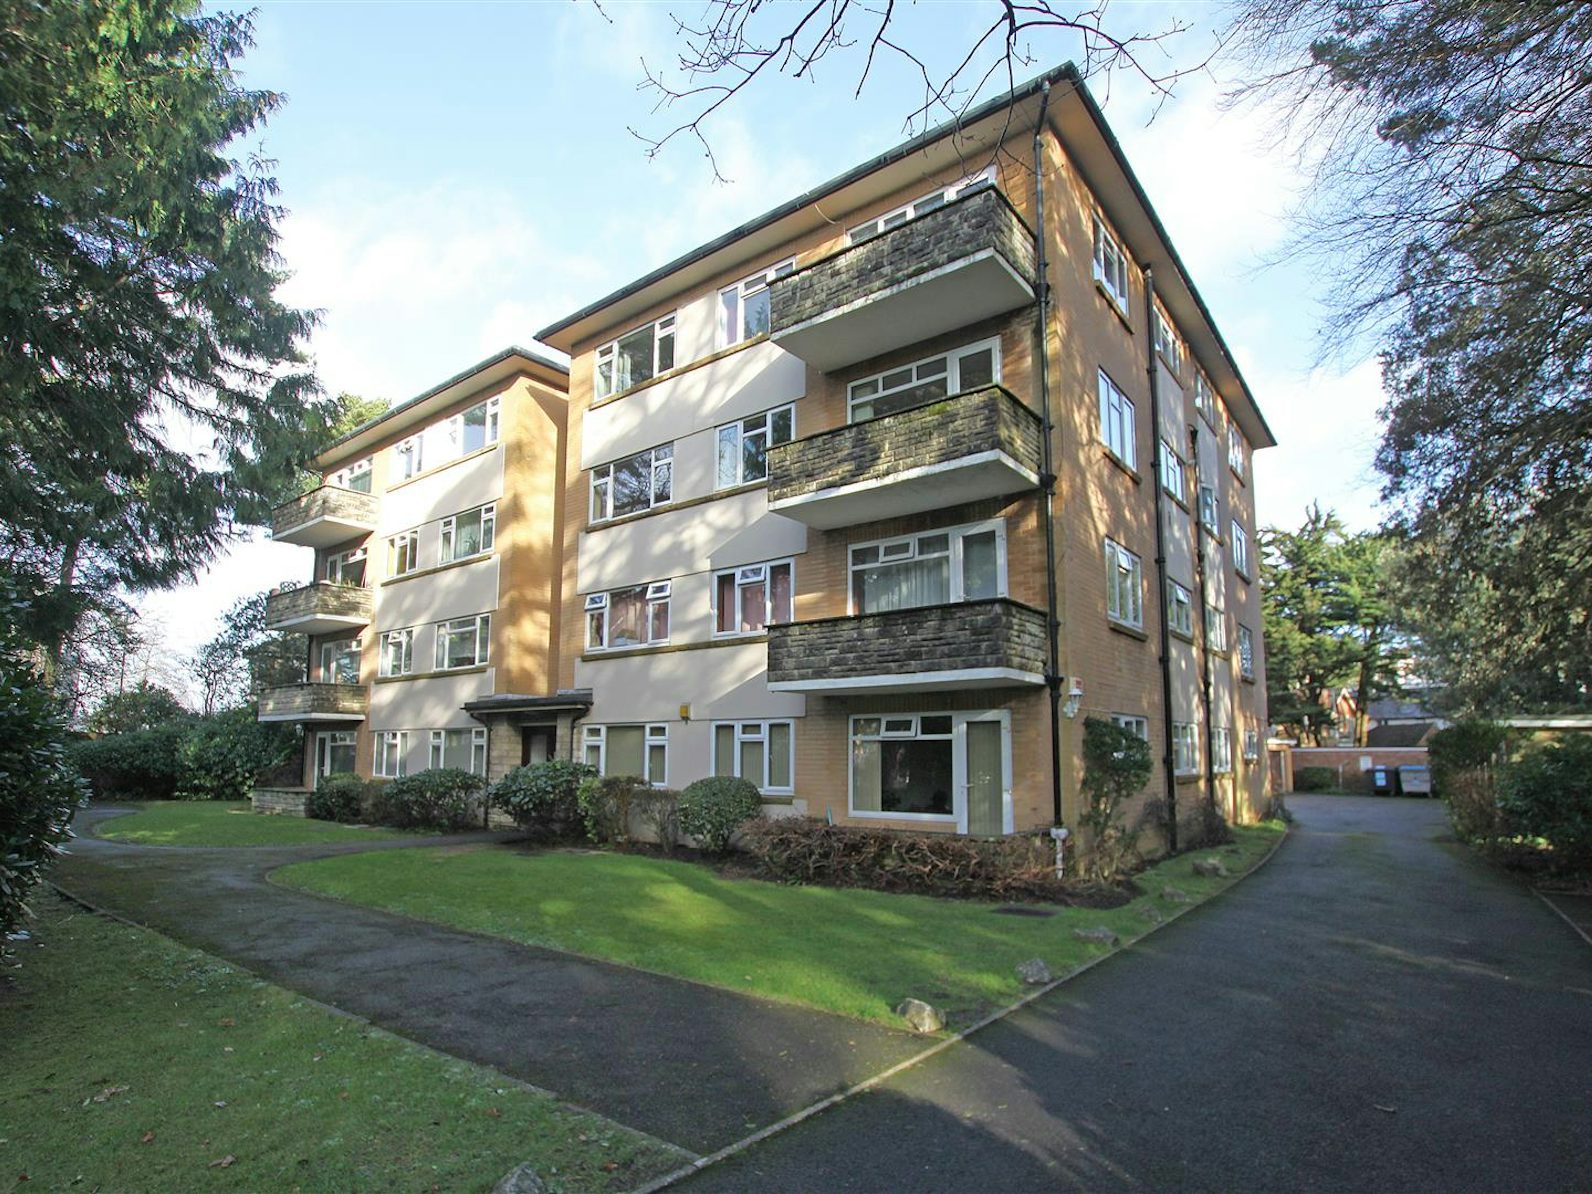 Flat for sale on Manor Road Bournemouth, BH1